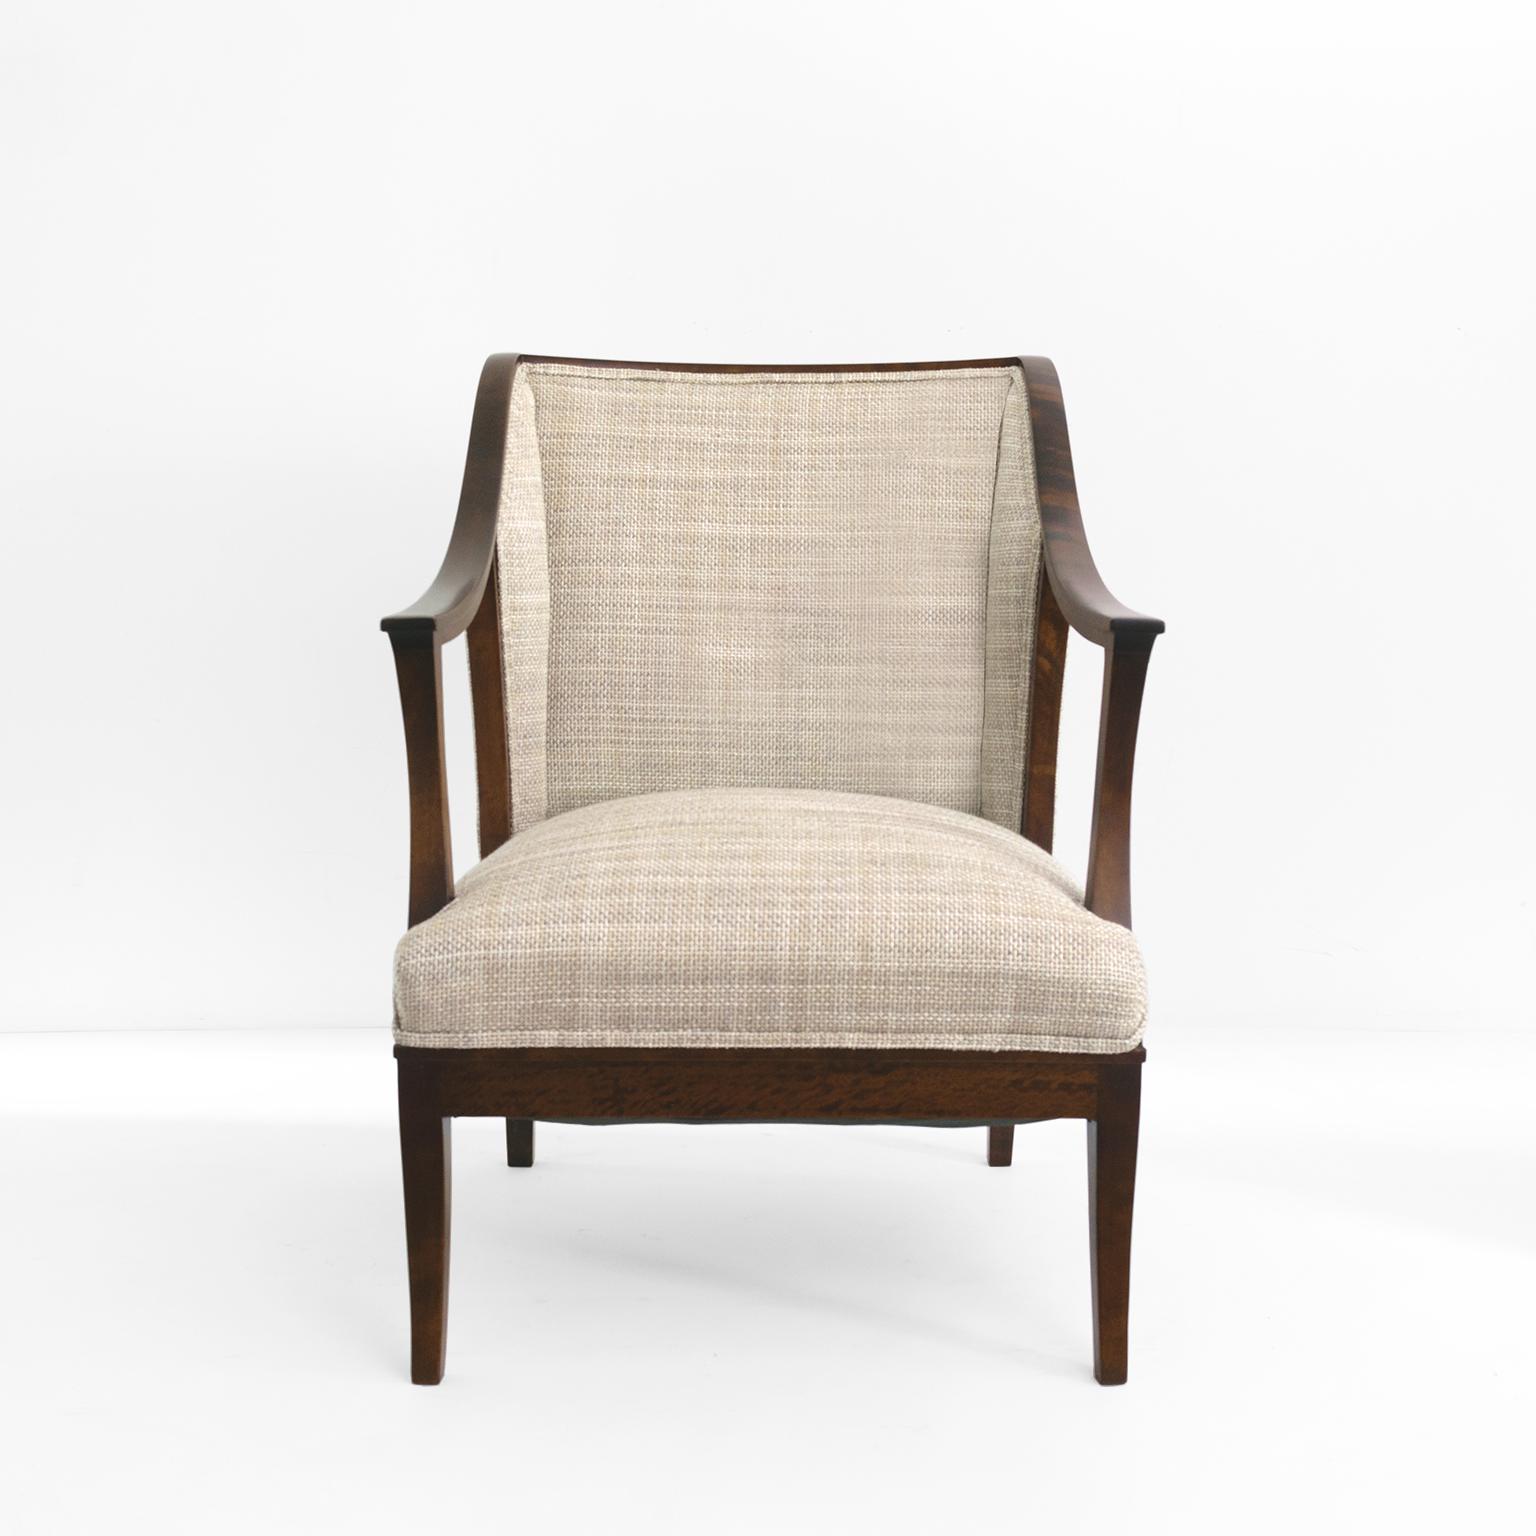 20th Century Swedish Armchairs in Stained Solid Birch, by SFM Bodafors, circa 1930 For Sale